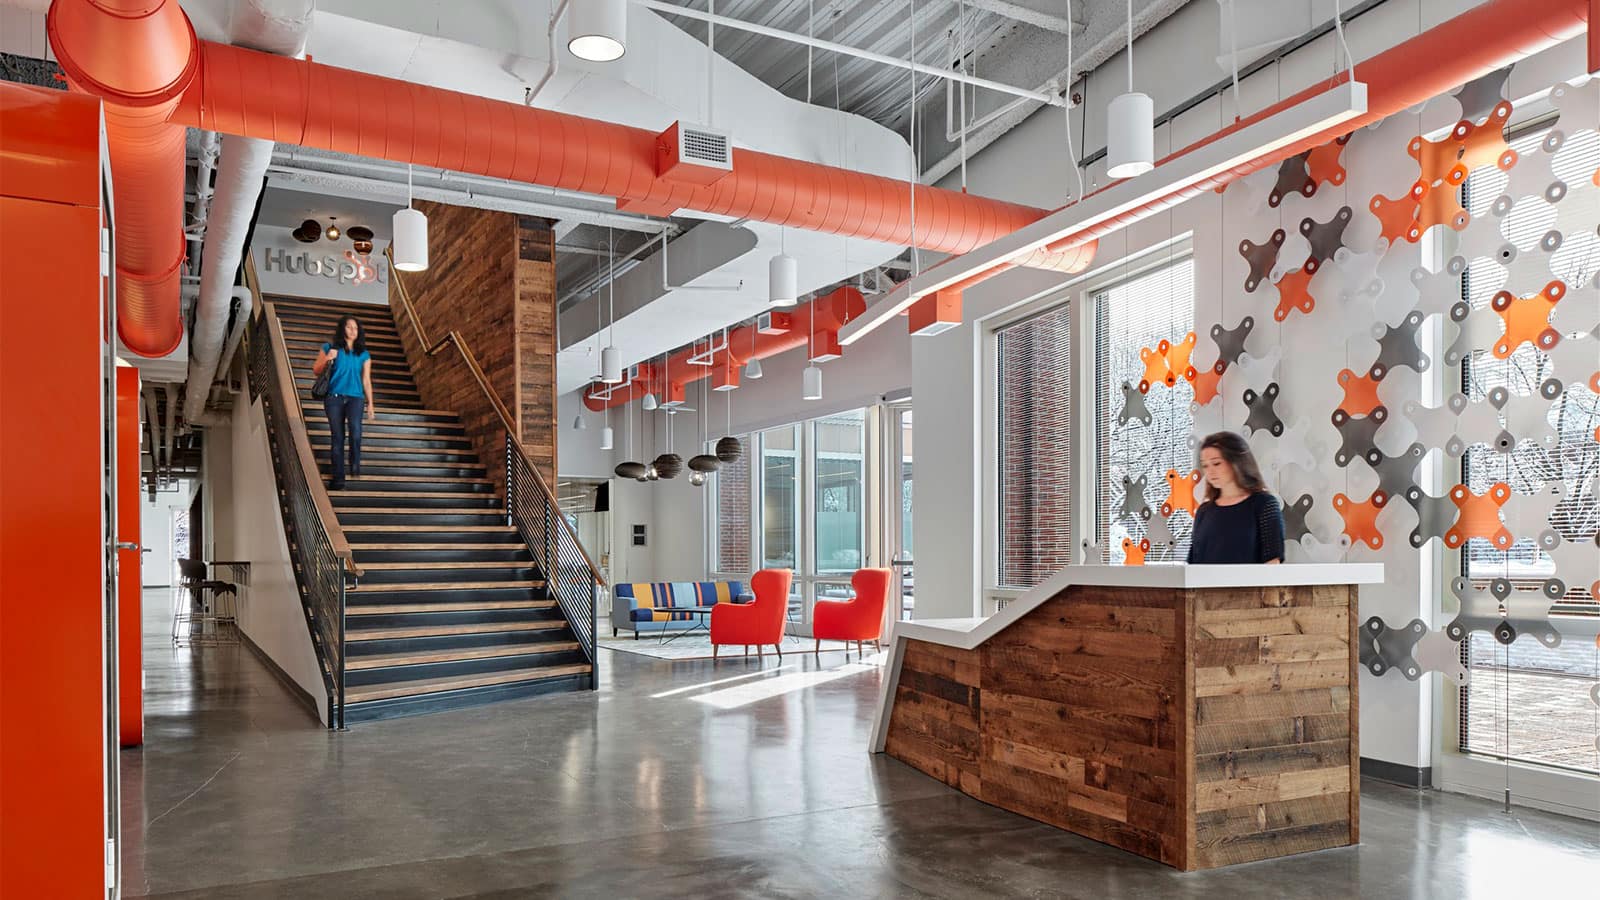 The Hubspot campus in Cambridge MA